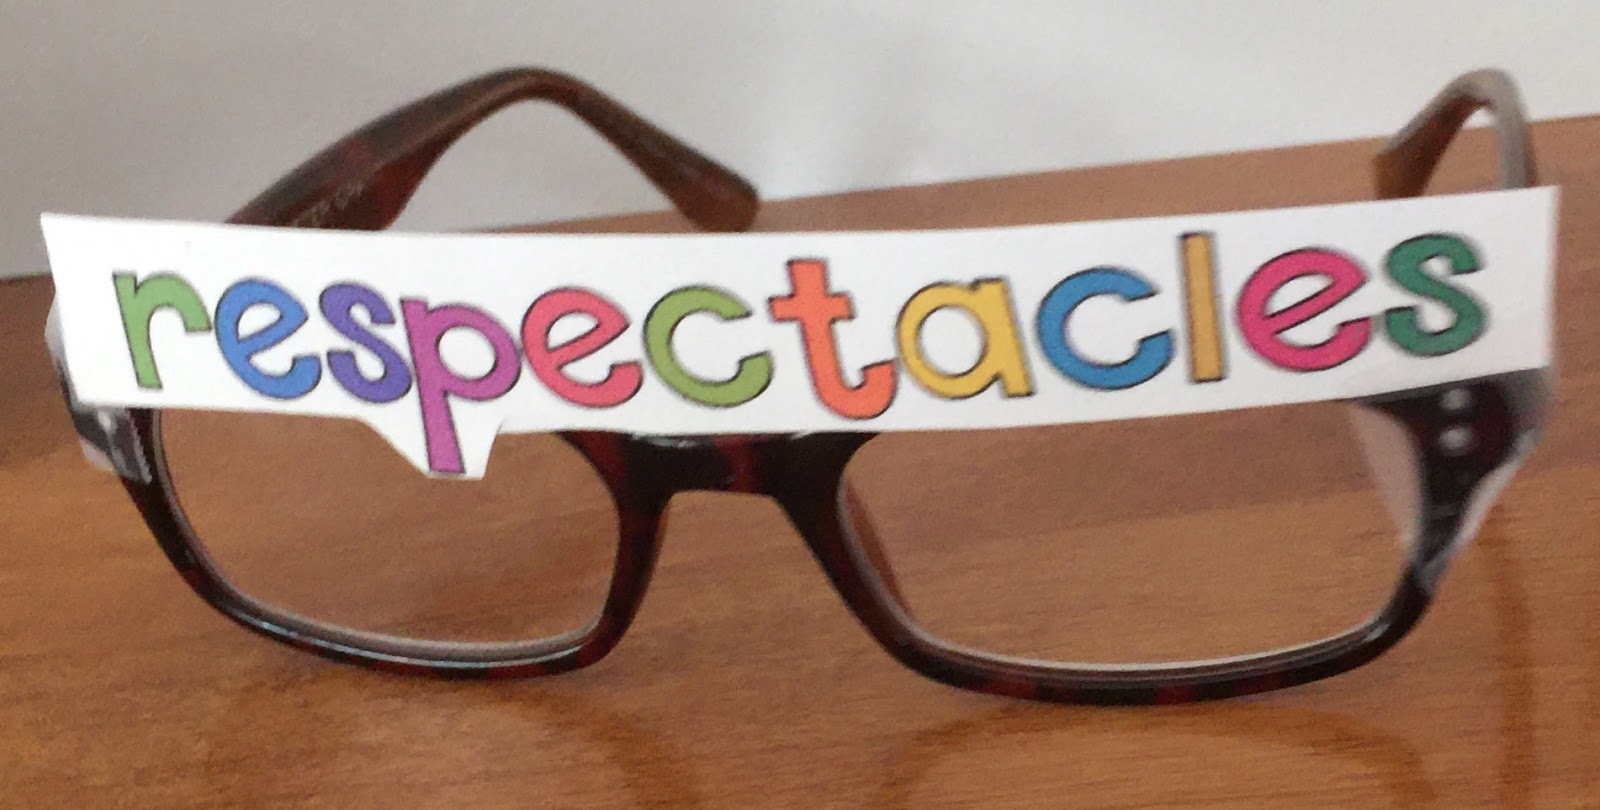 ReSpectacle